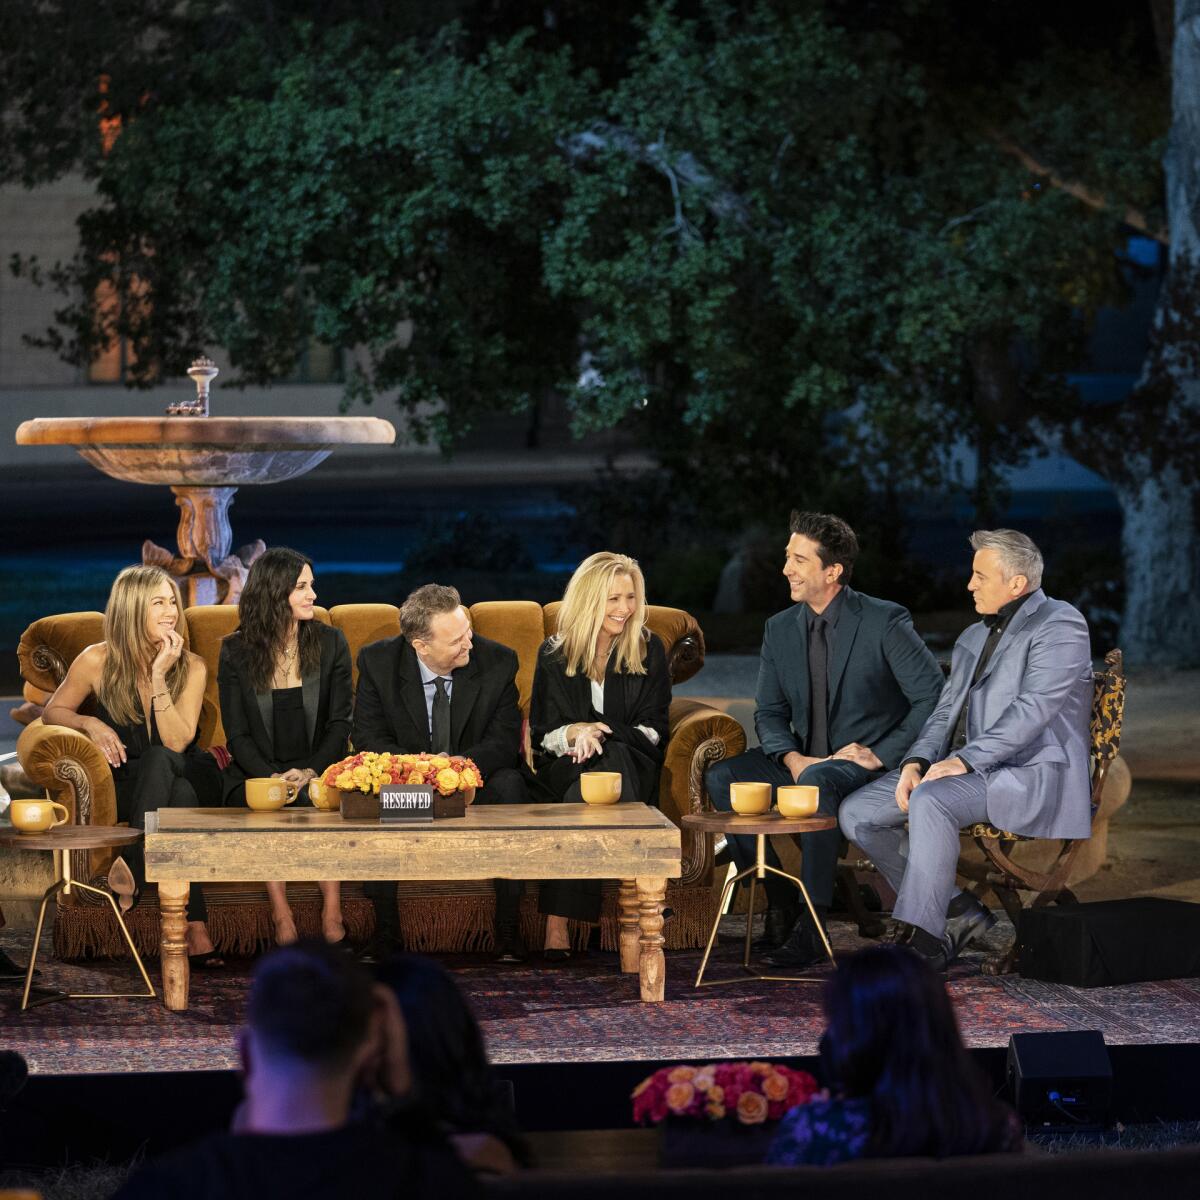 The cast of "Friends" sit on a couch in front of a fountain.